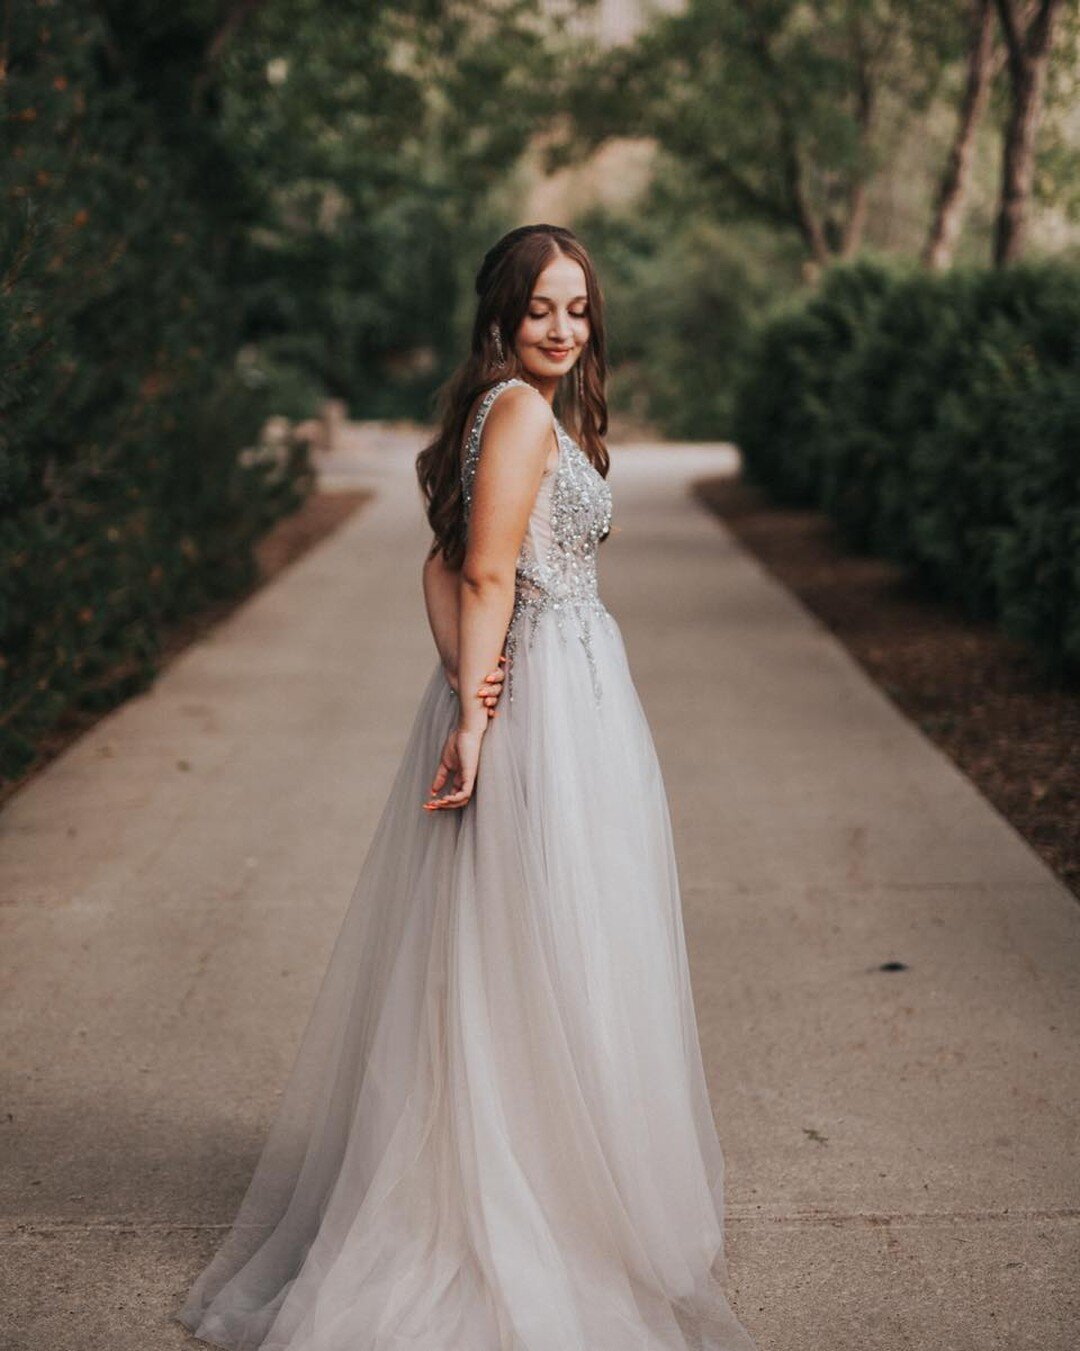 All though June still feels so far away, I&rsquo;m already getting excited to capture some beautiful grad dresses this year. Message me if you&rsquo;d like to get a jump on things and reserve your grad date!